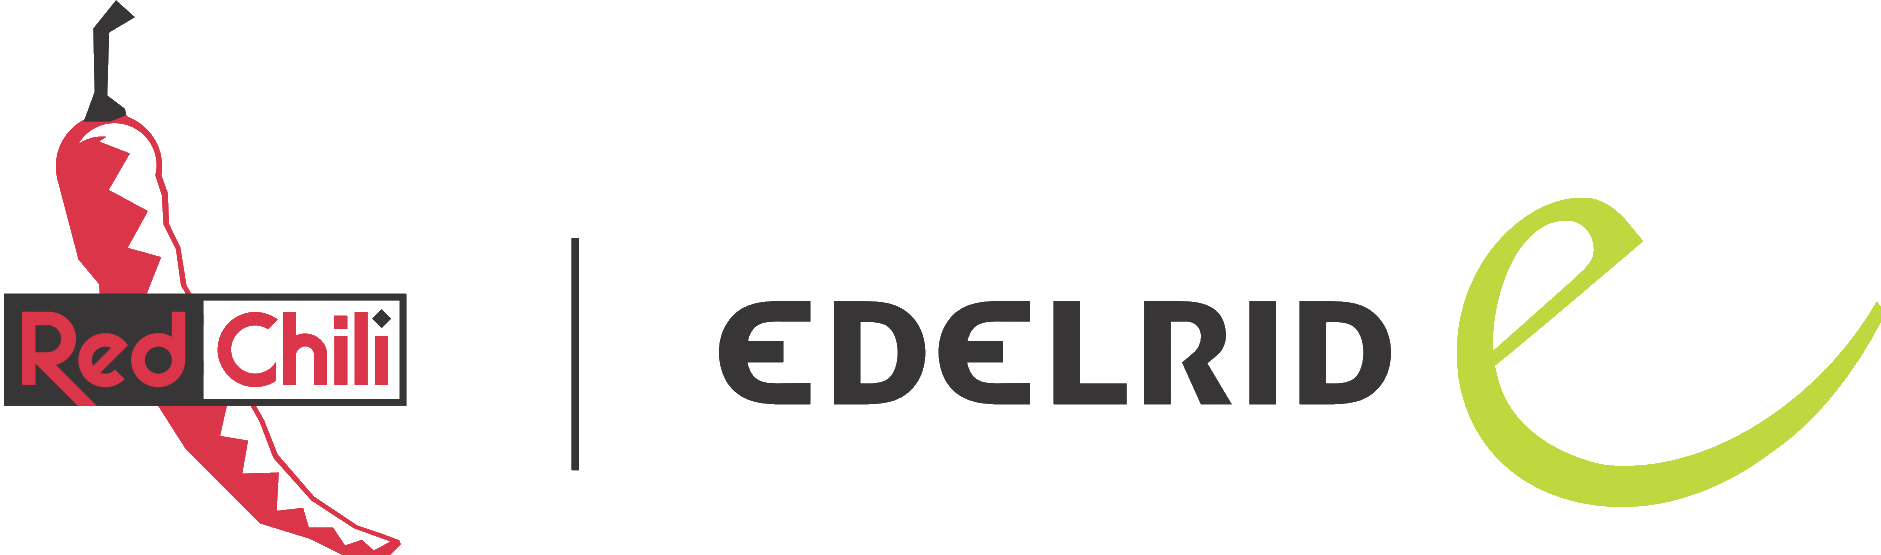 Edelrid / Red Chili